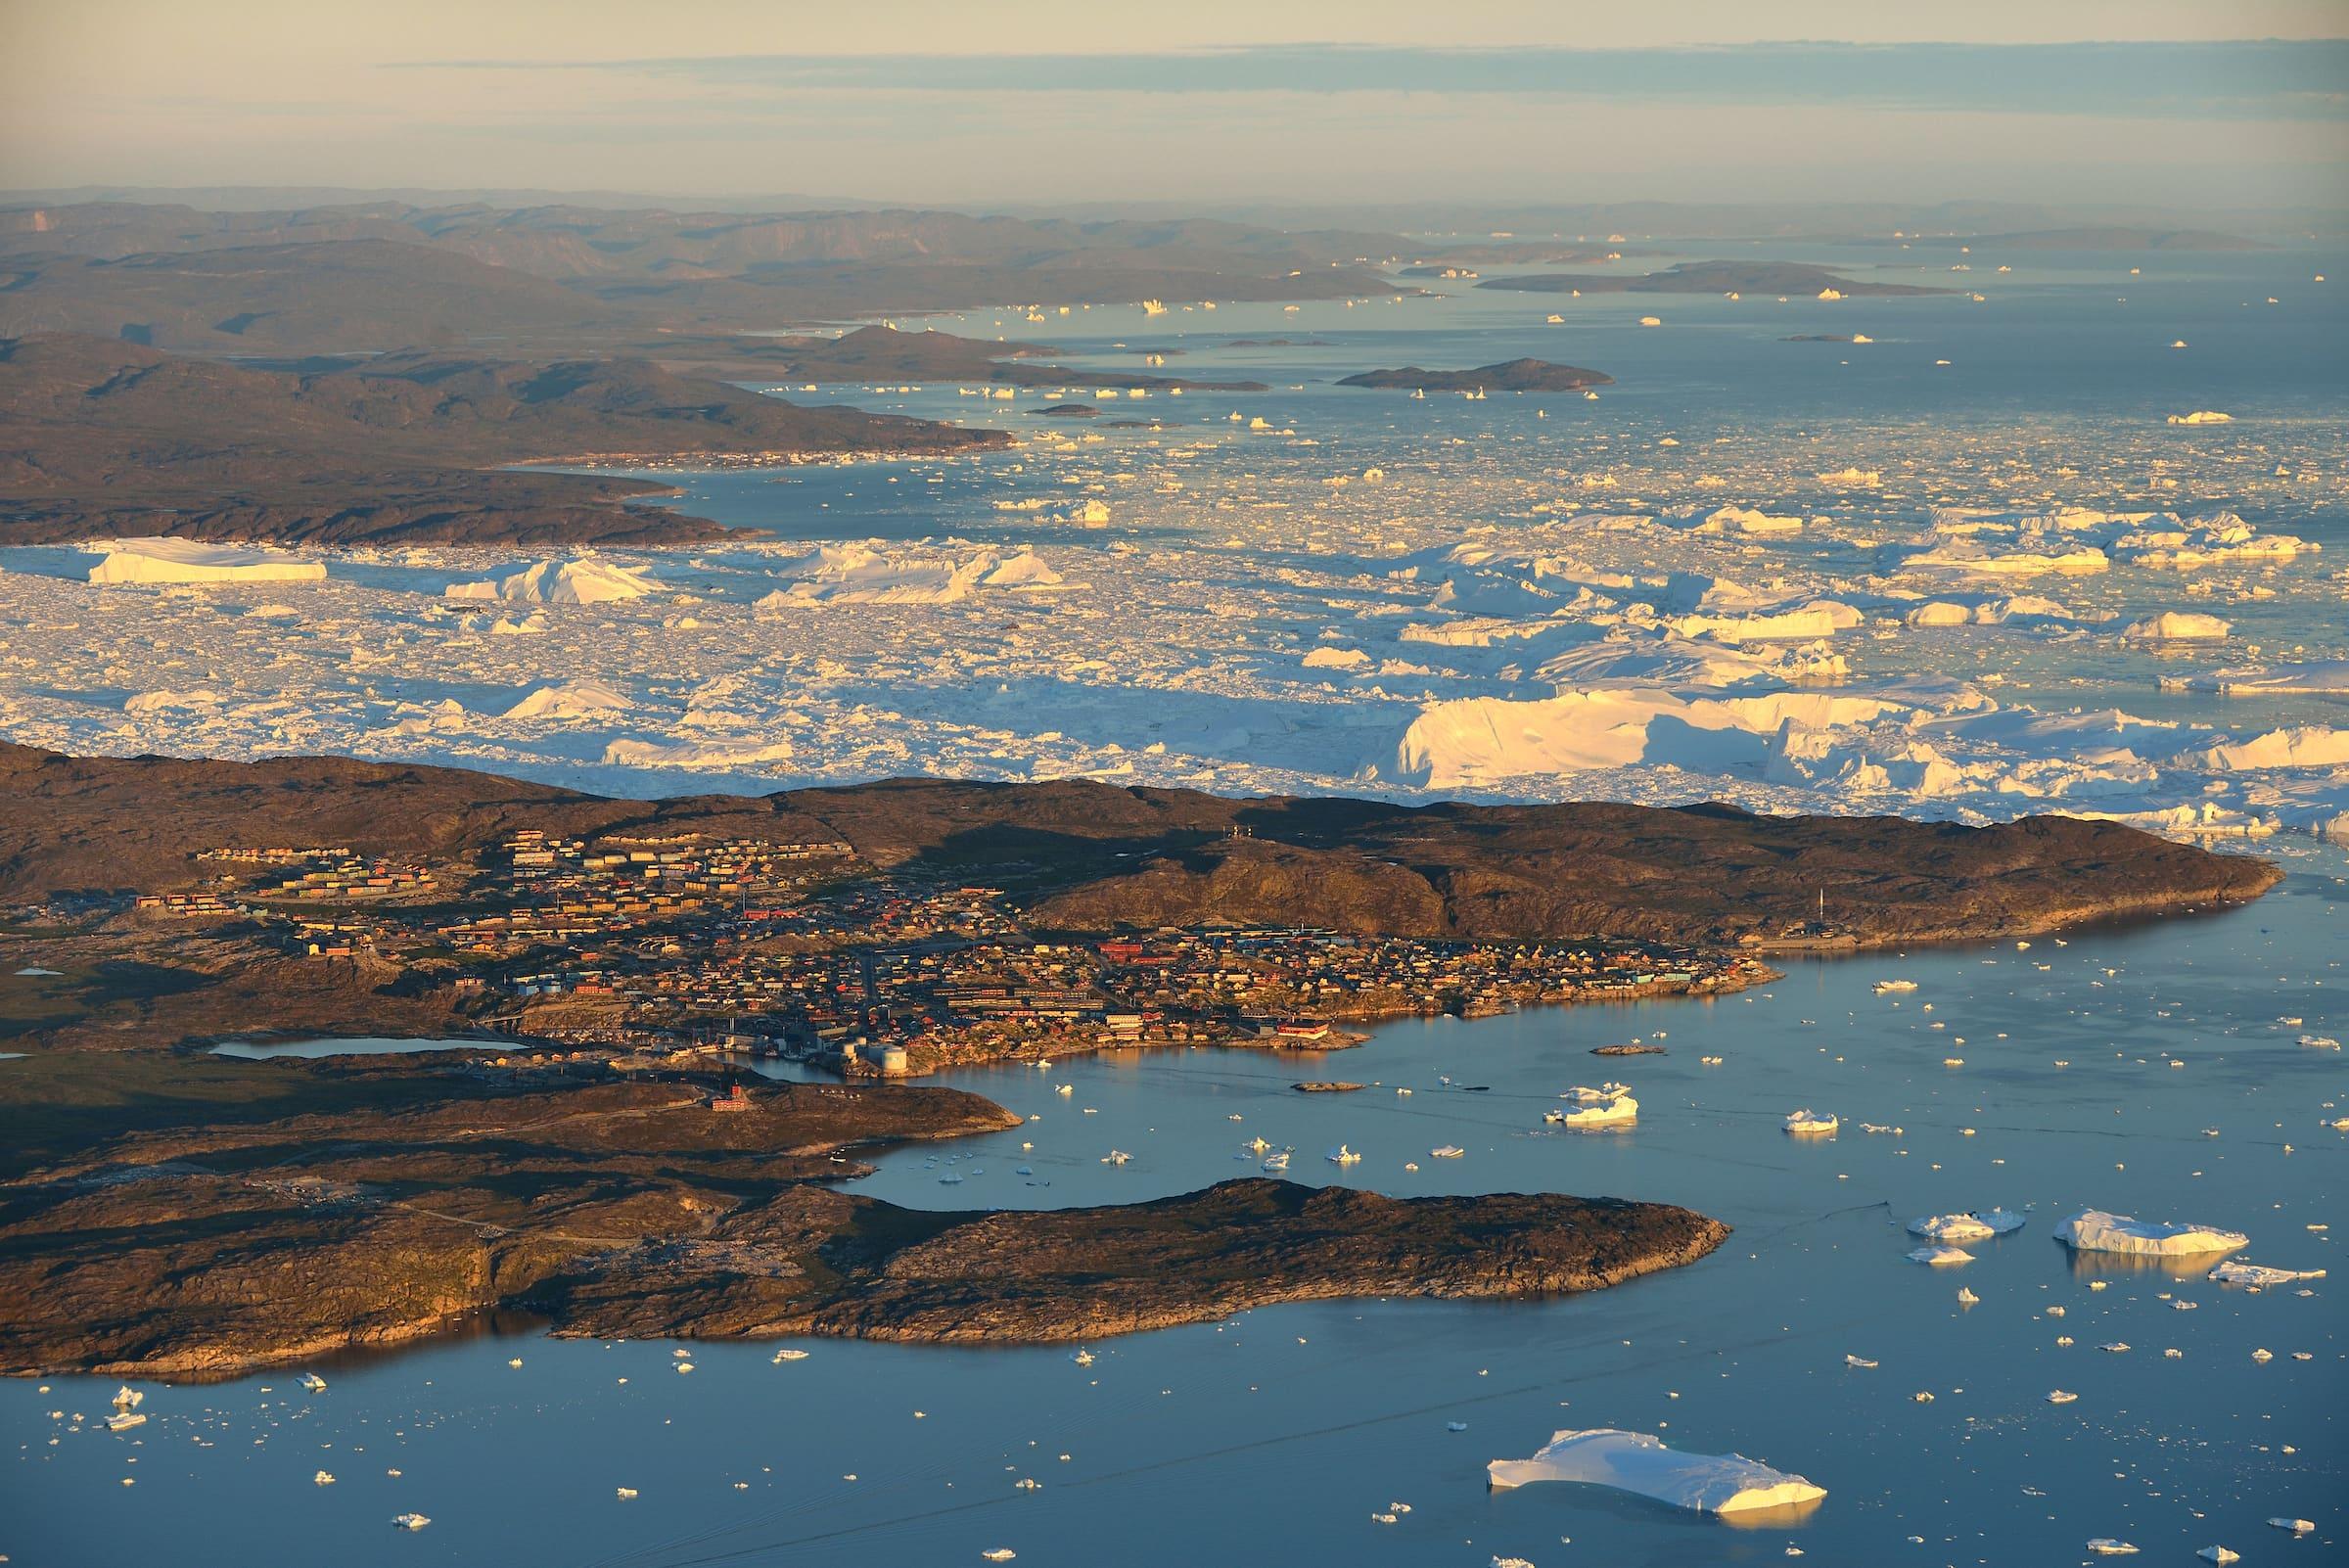 Ilulissat and Ilulissat Icefjord from the air. Photo by Rino Rasmussen